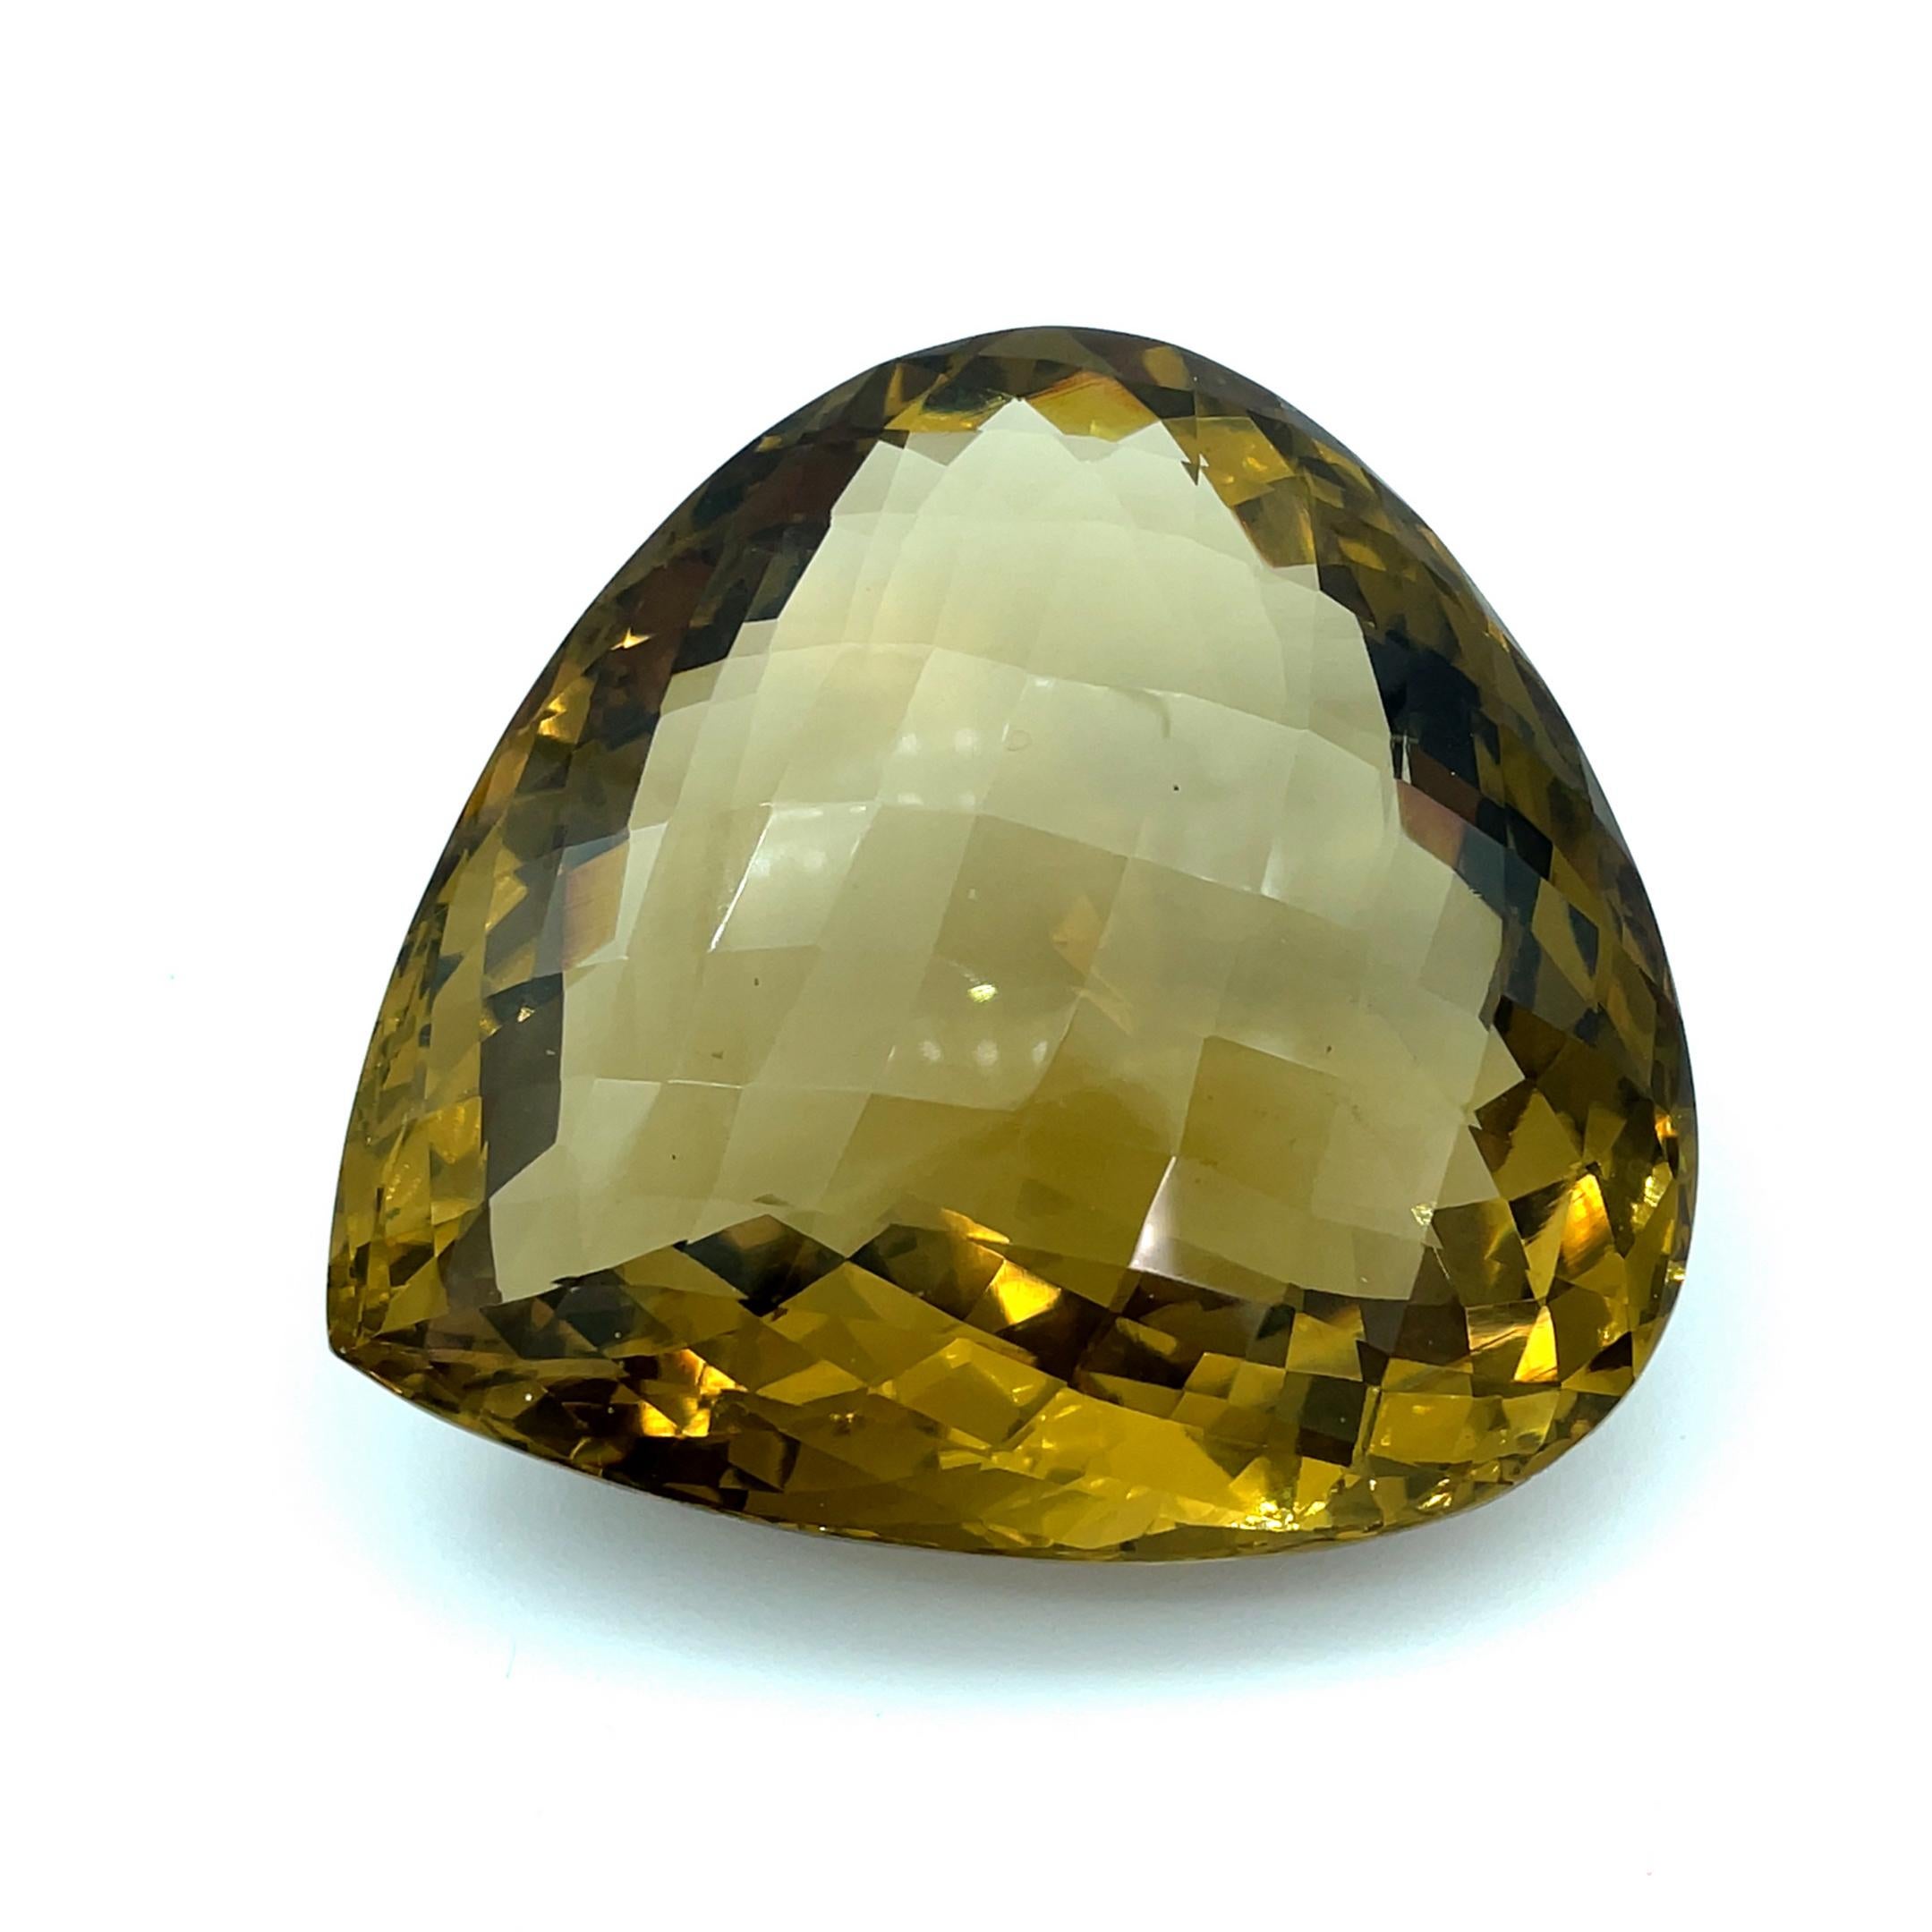 If you know someone who loves beautiful rocks and gemstones, this pear-shaped faceted smoky quartz is sure to impress! This glistening gemstone measures 3-3/8 x 3-1/4 x 1-1/2